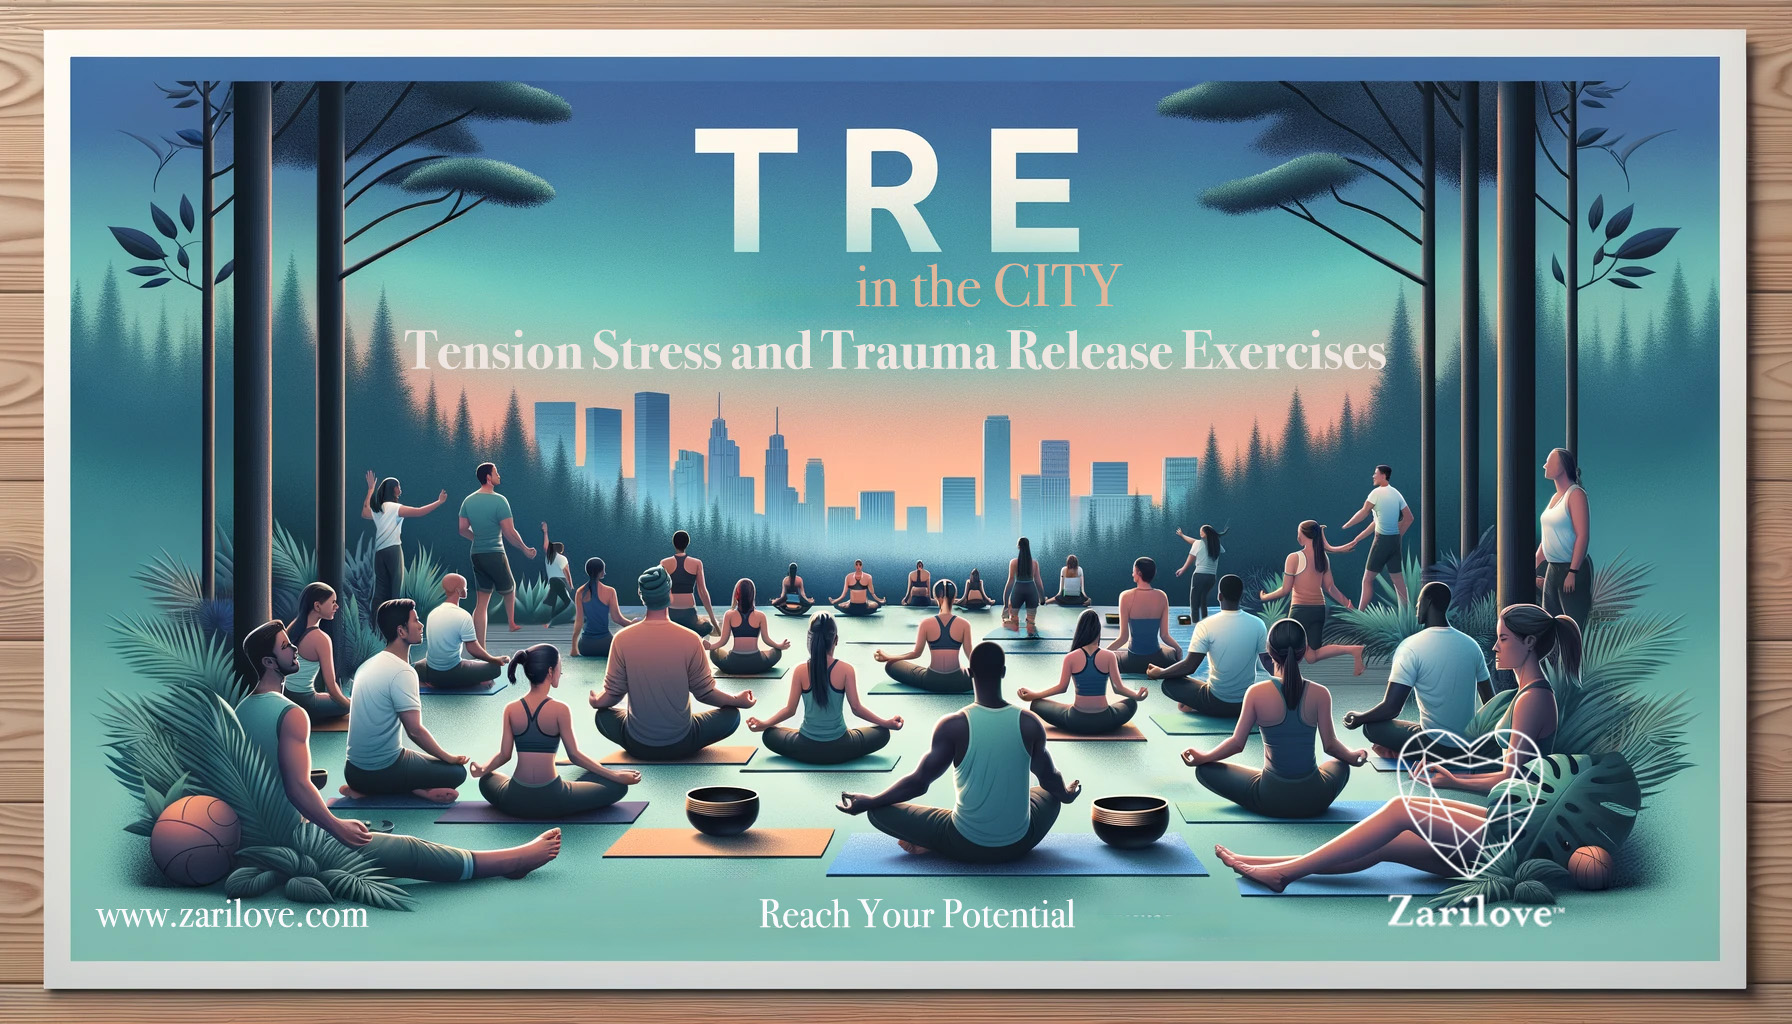 TRE® Tension, Stress and Trauma Release Exercises with Sound bowls- Discovery workshop 